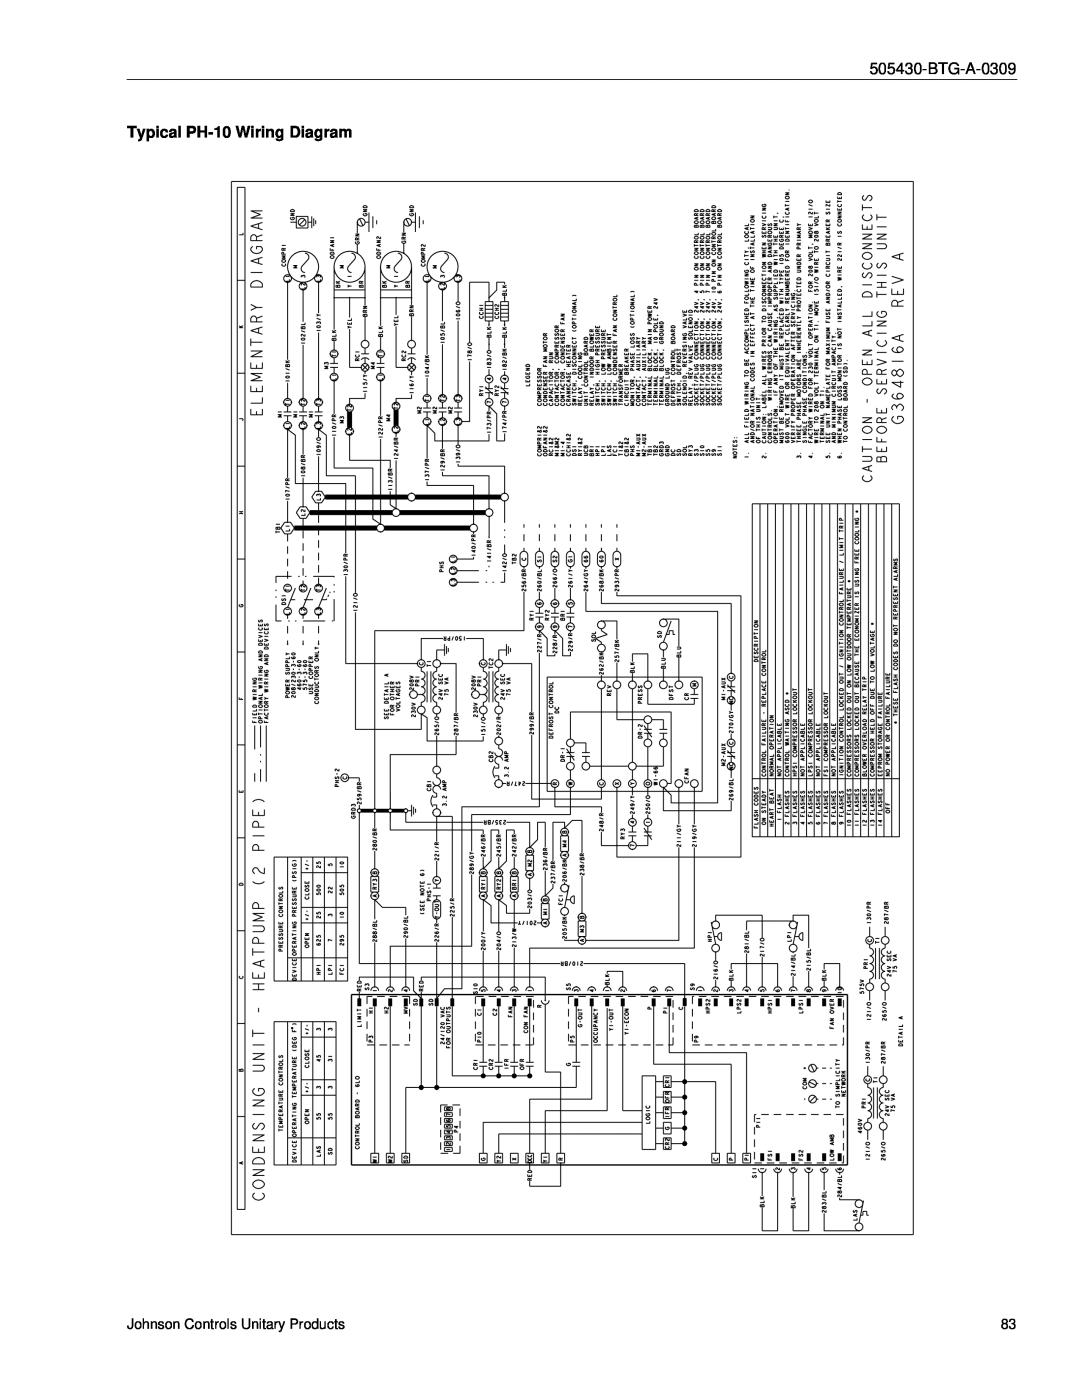 Johnson Controls R-410A manual Typical PH-10Wiring Diagram, Johnson Controls Unitary Products 